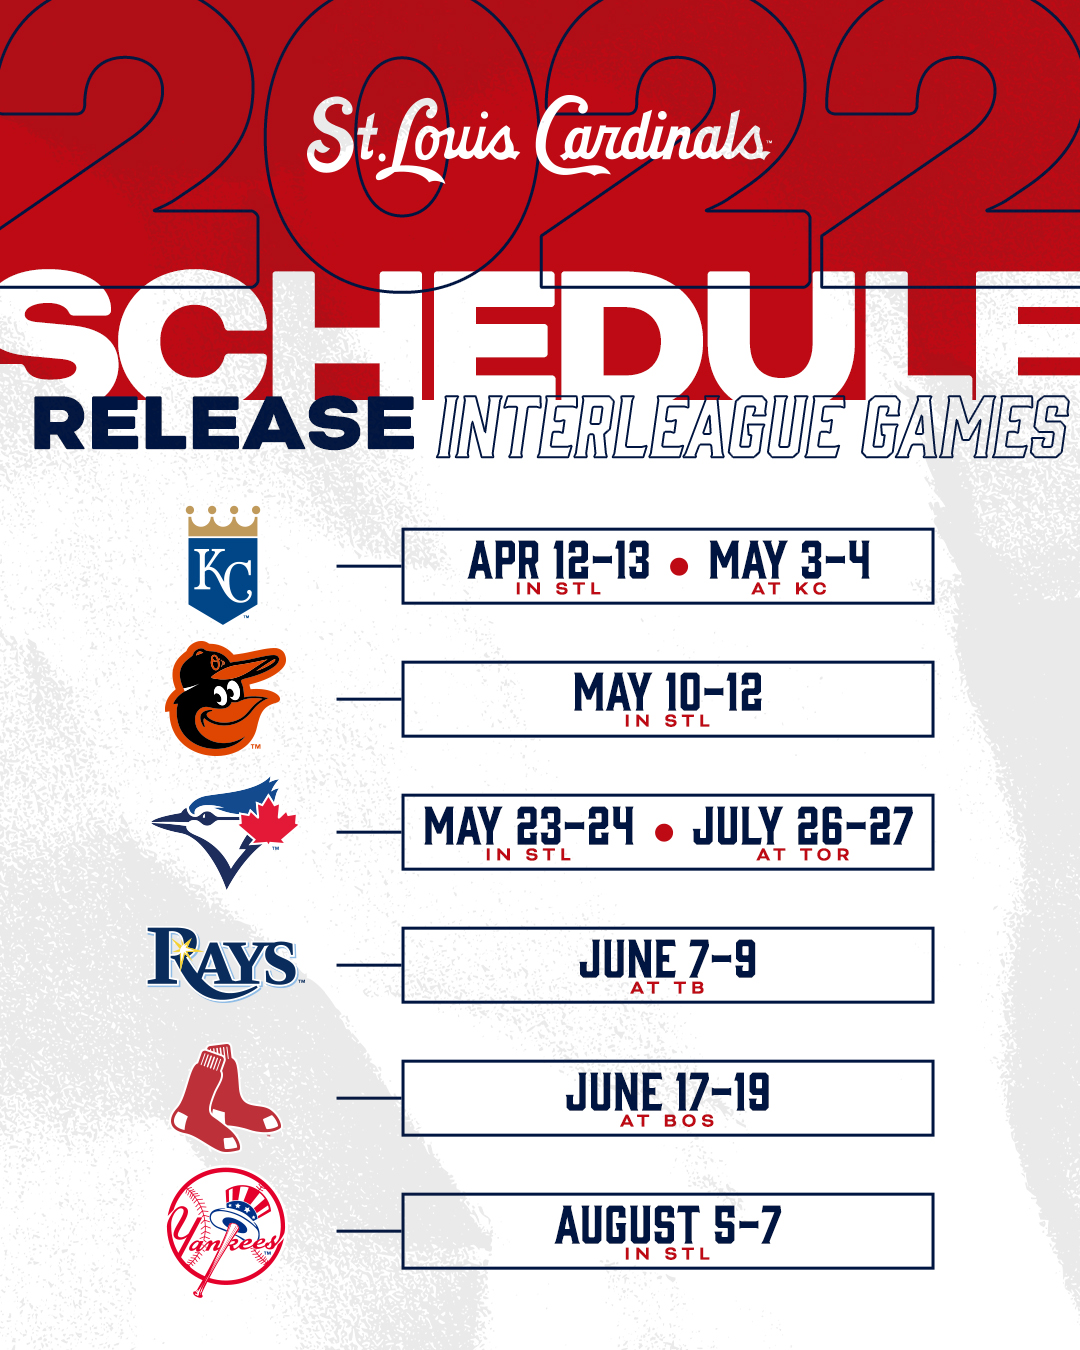 St. Louis Cardinals on X: Our 2022 schedule is here! For the